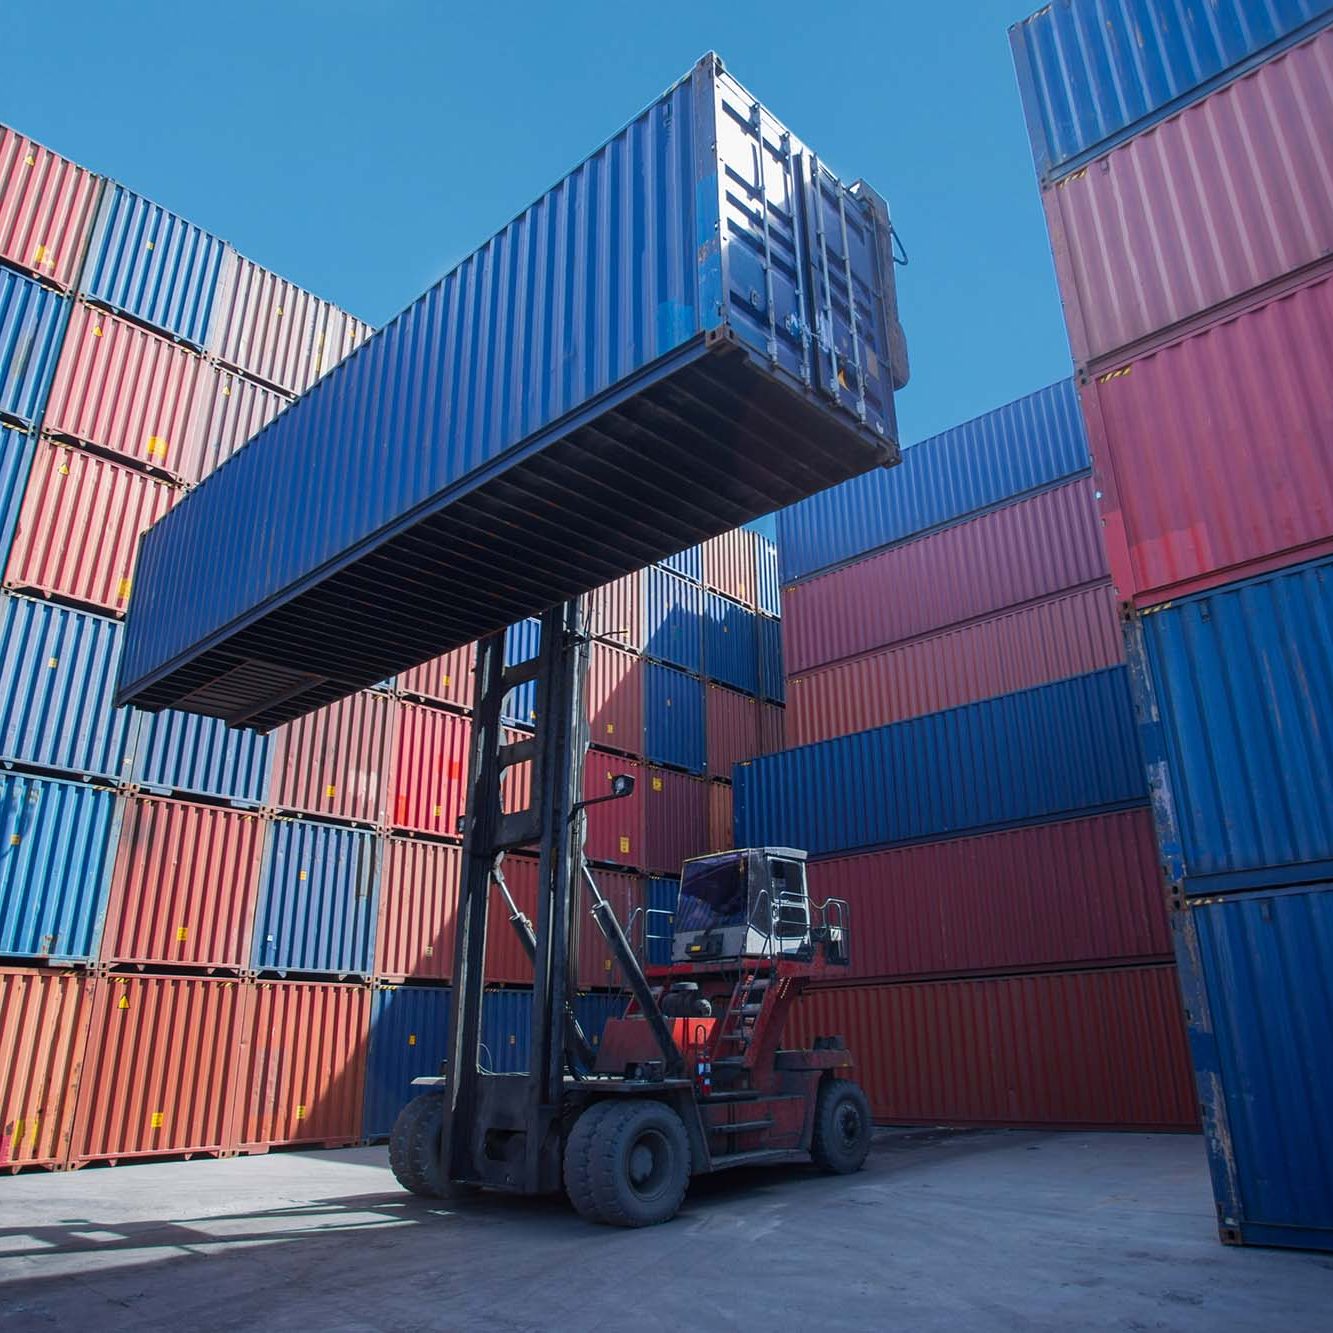 Forklift truck lifting cargo container in shipping yard or dock